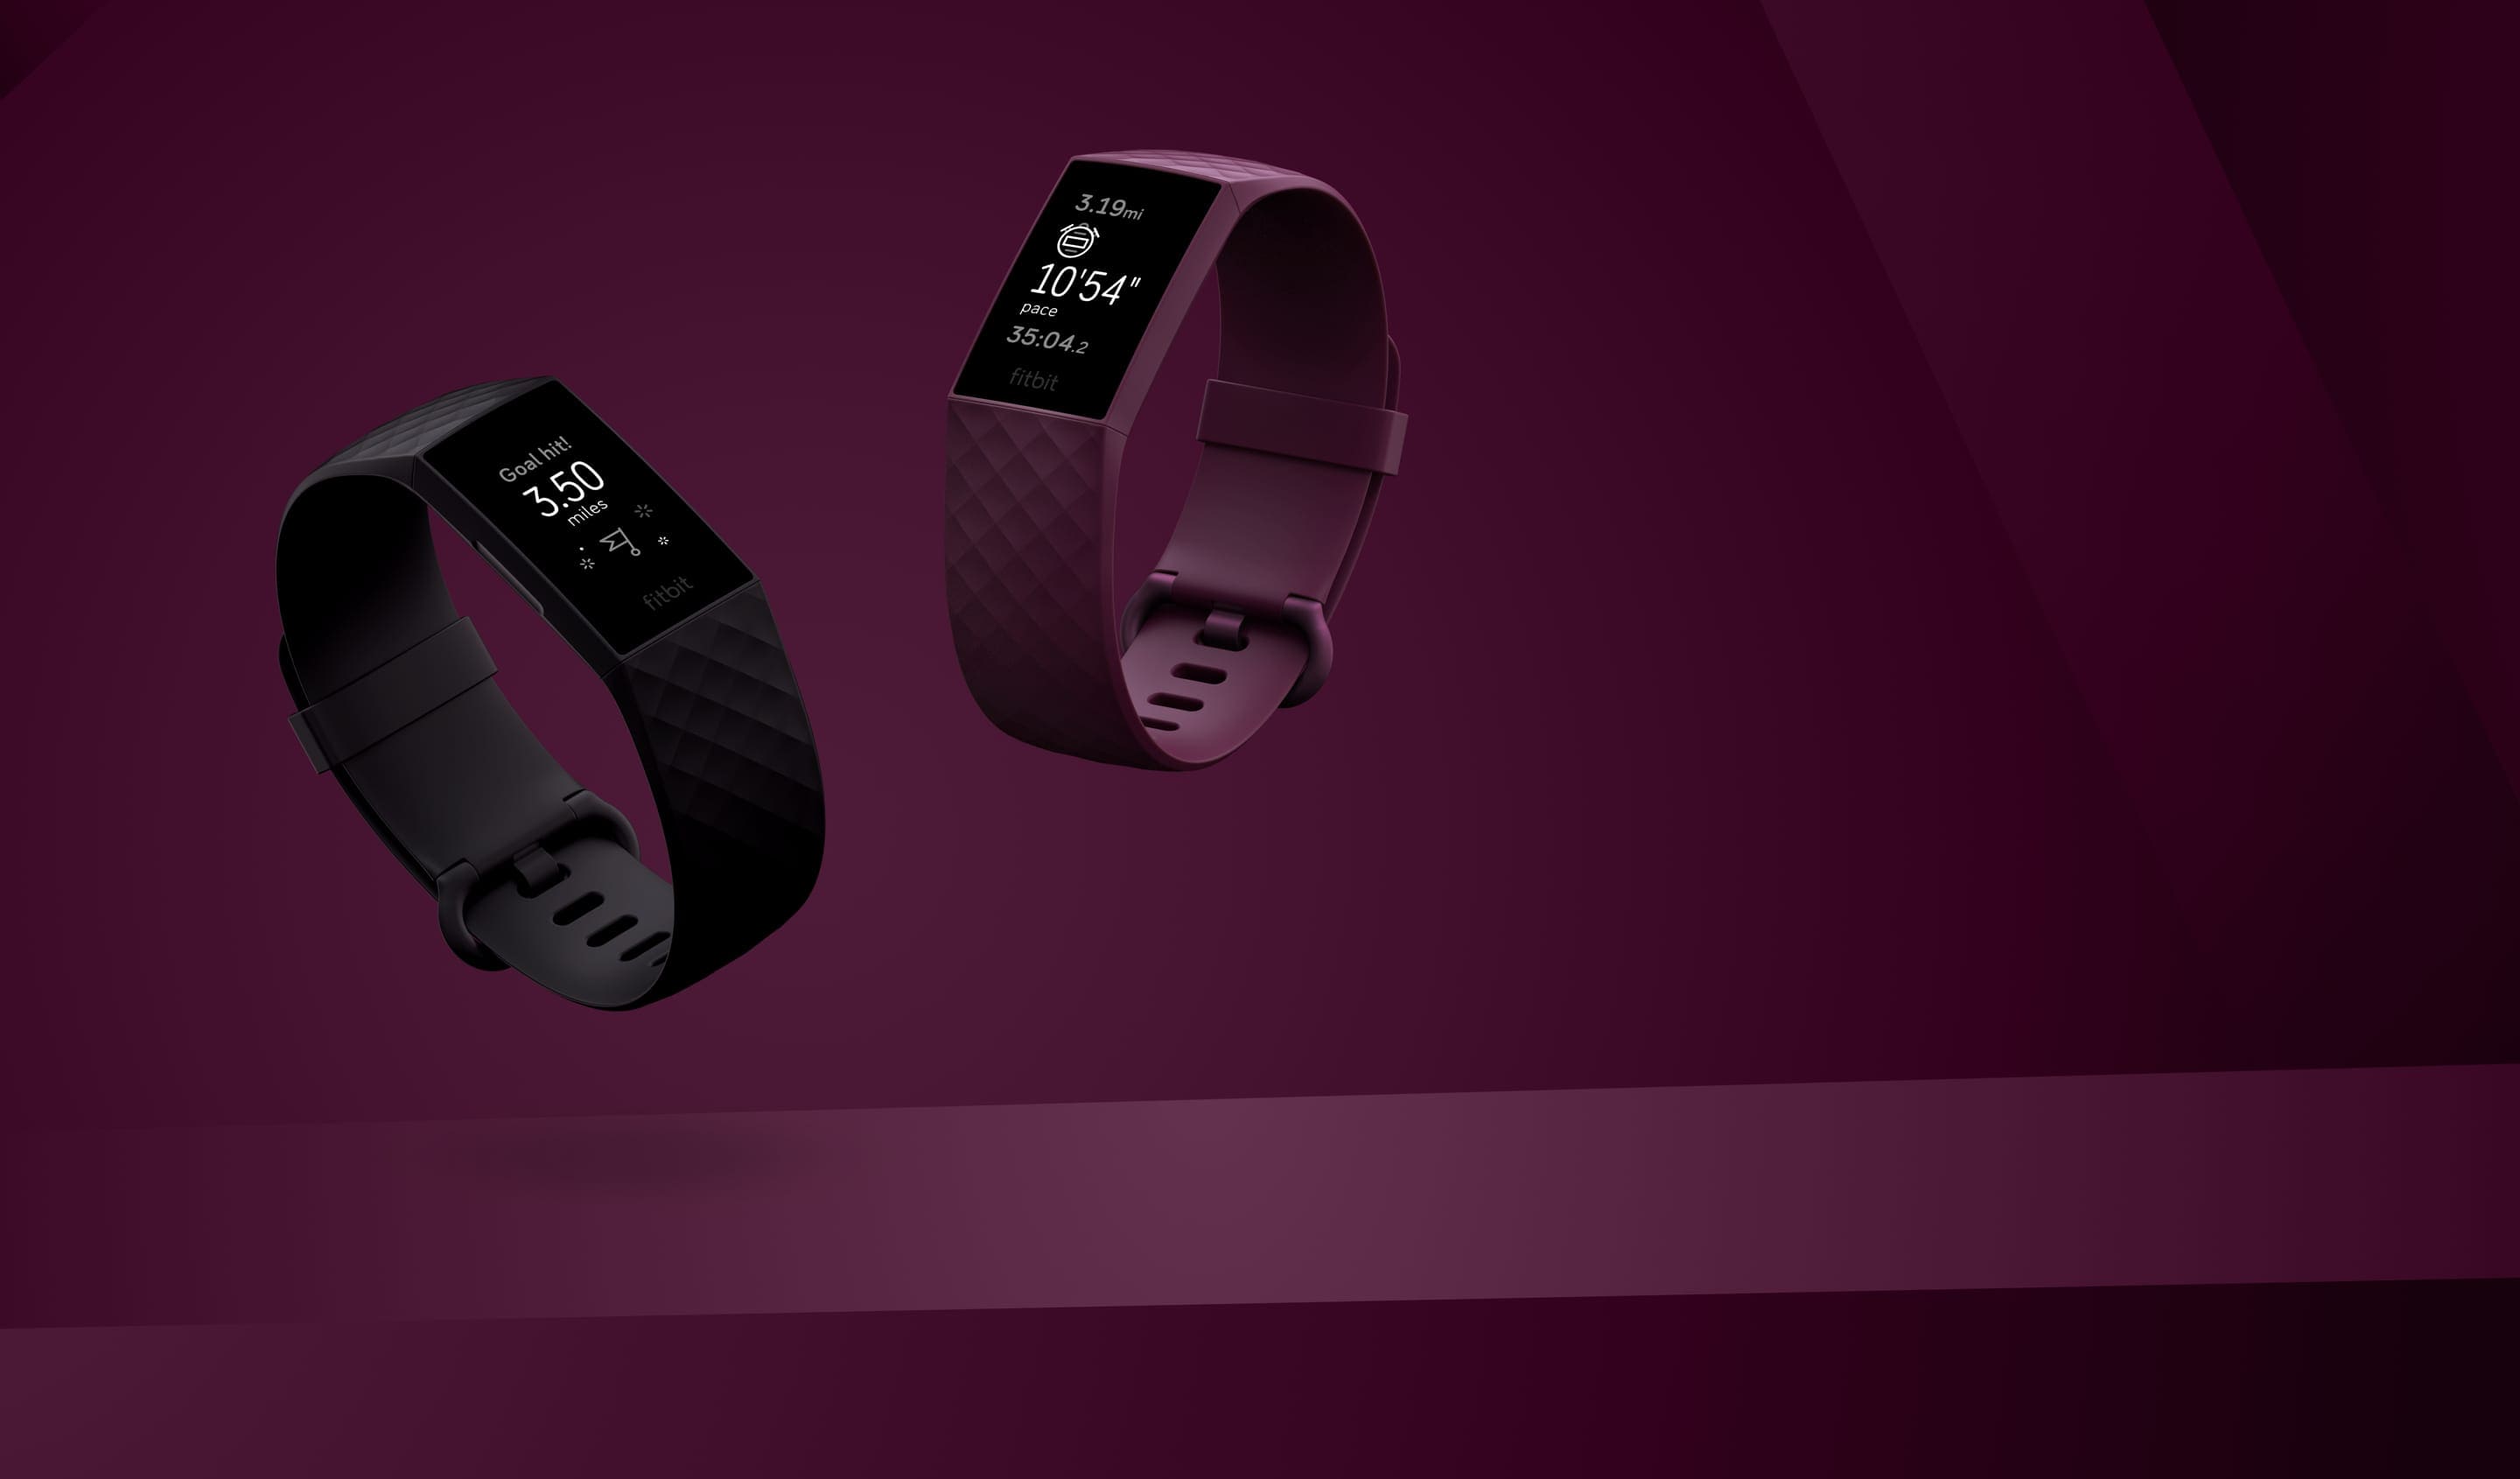 Fitbit Or Simple Pedometer: Which Is More Accurate?